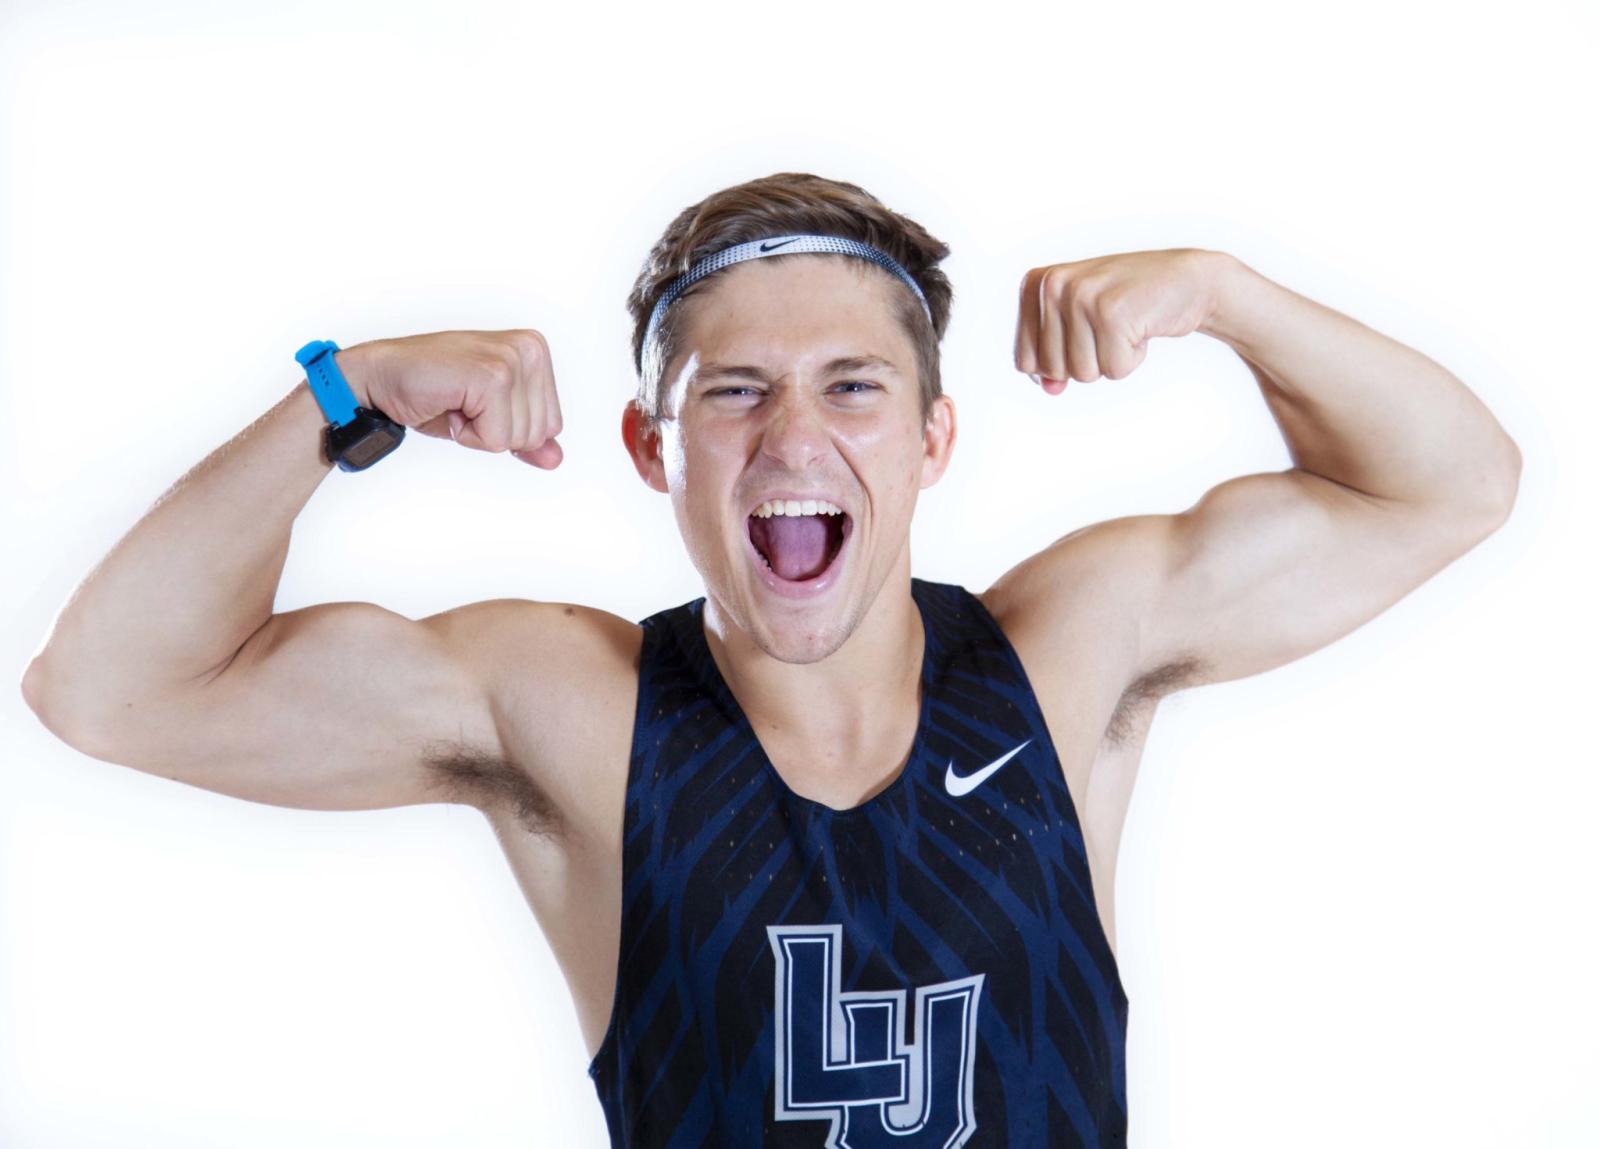 Cross country runner Adam Bruce shows off his biceps